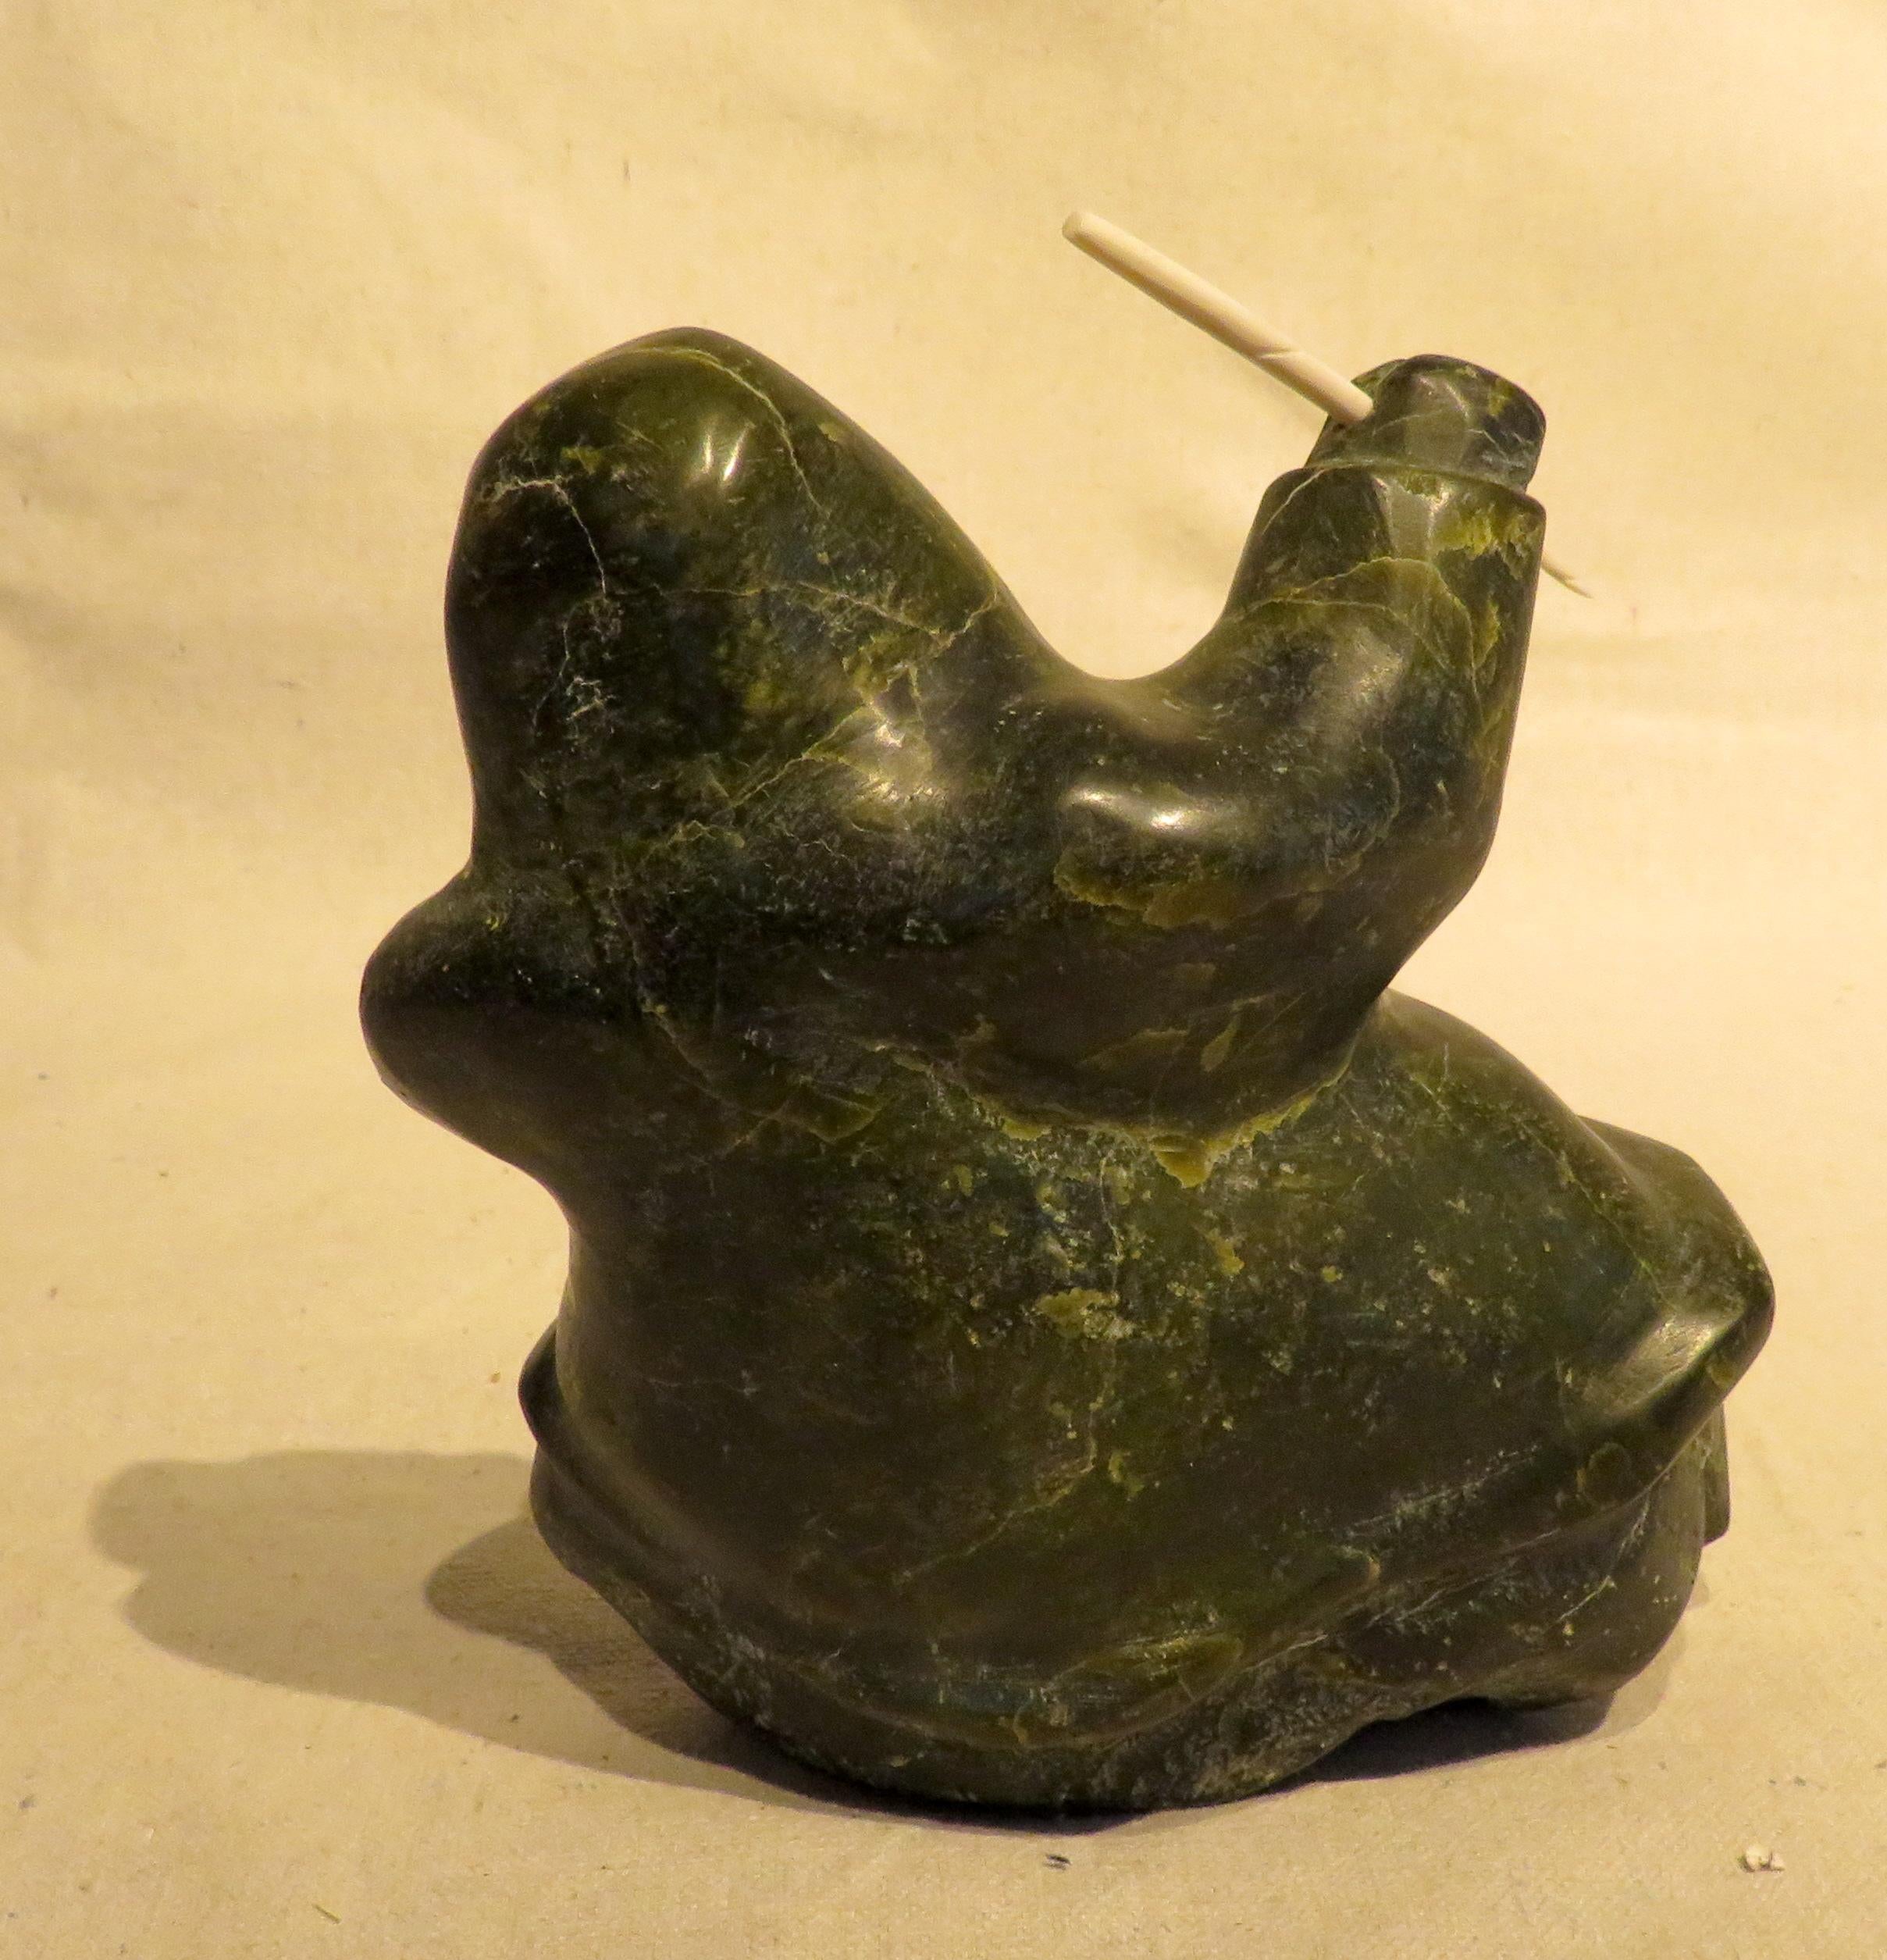 Carved Black Soapstone of Seated Inuit figure, holding a carved bone Narwhal tusk in one hand and a carved bone fish in the other.